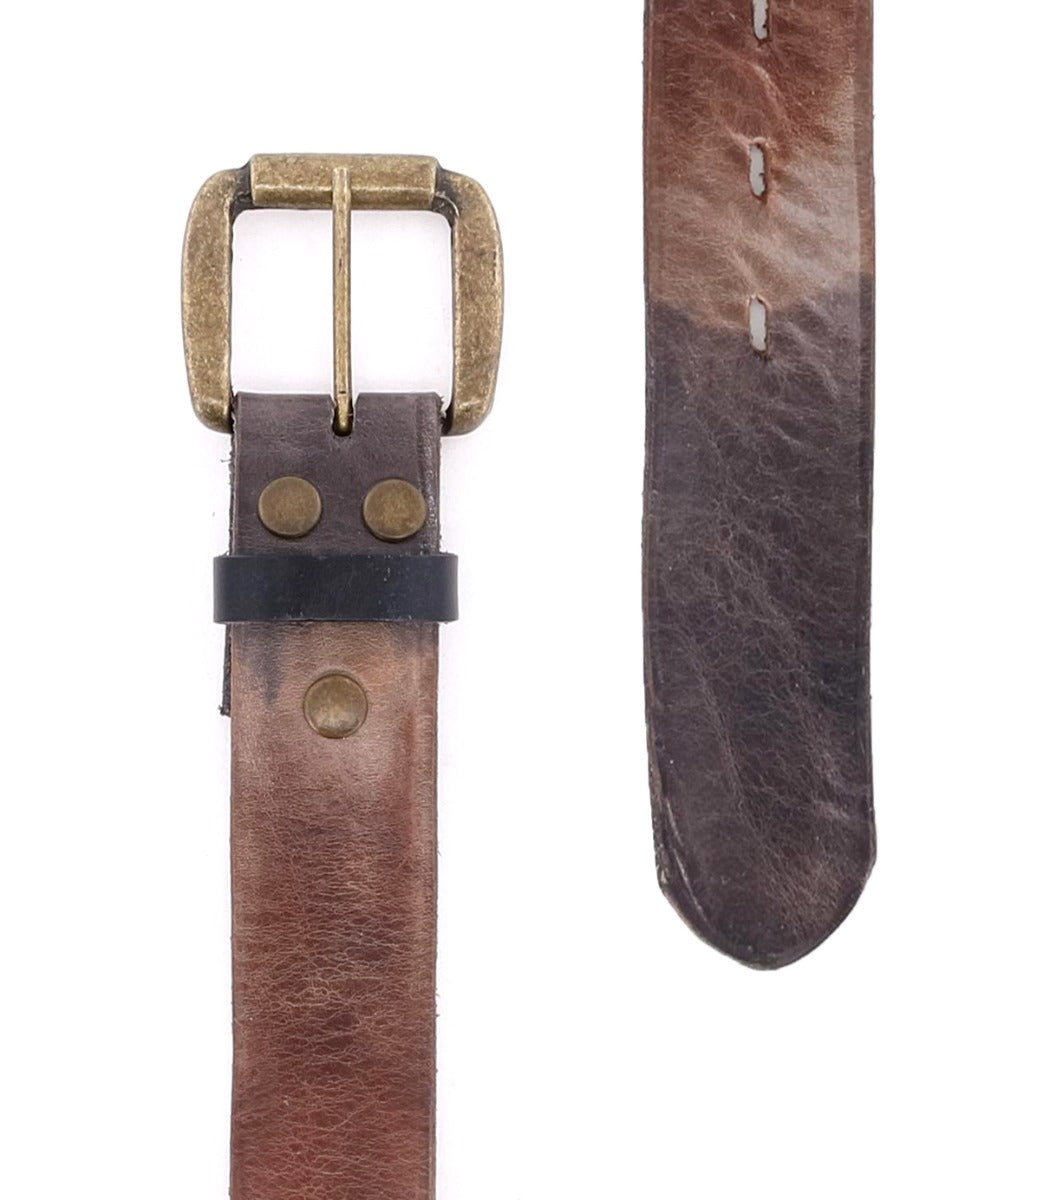 A brown leather Drifter belt with a brass buckle by Bed Stu.